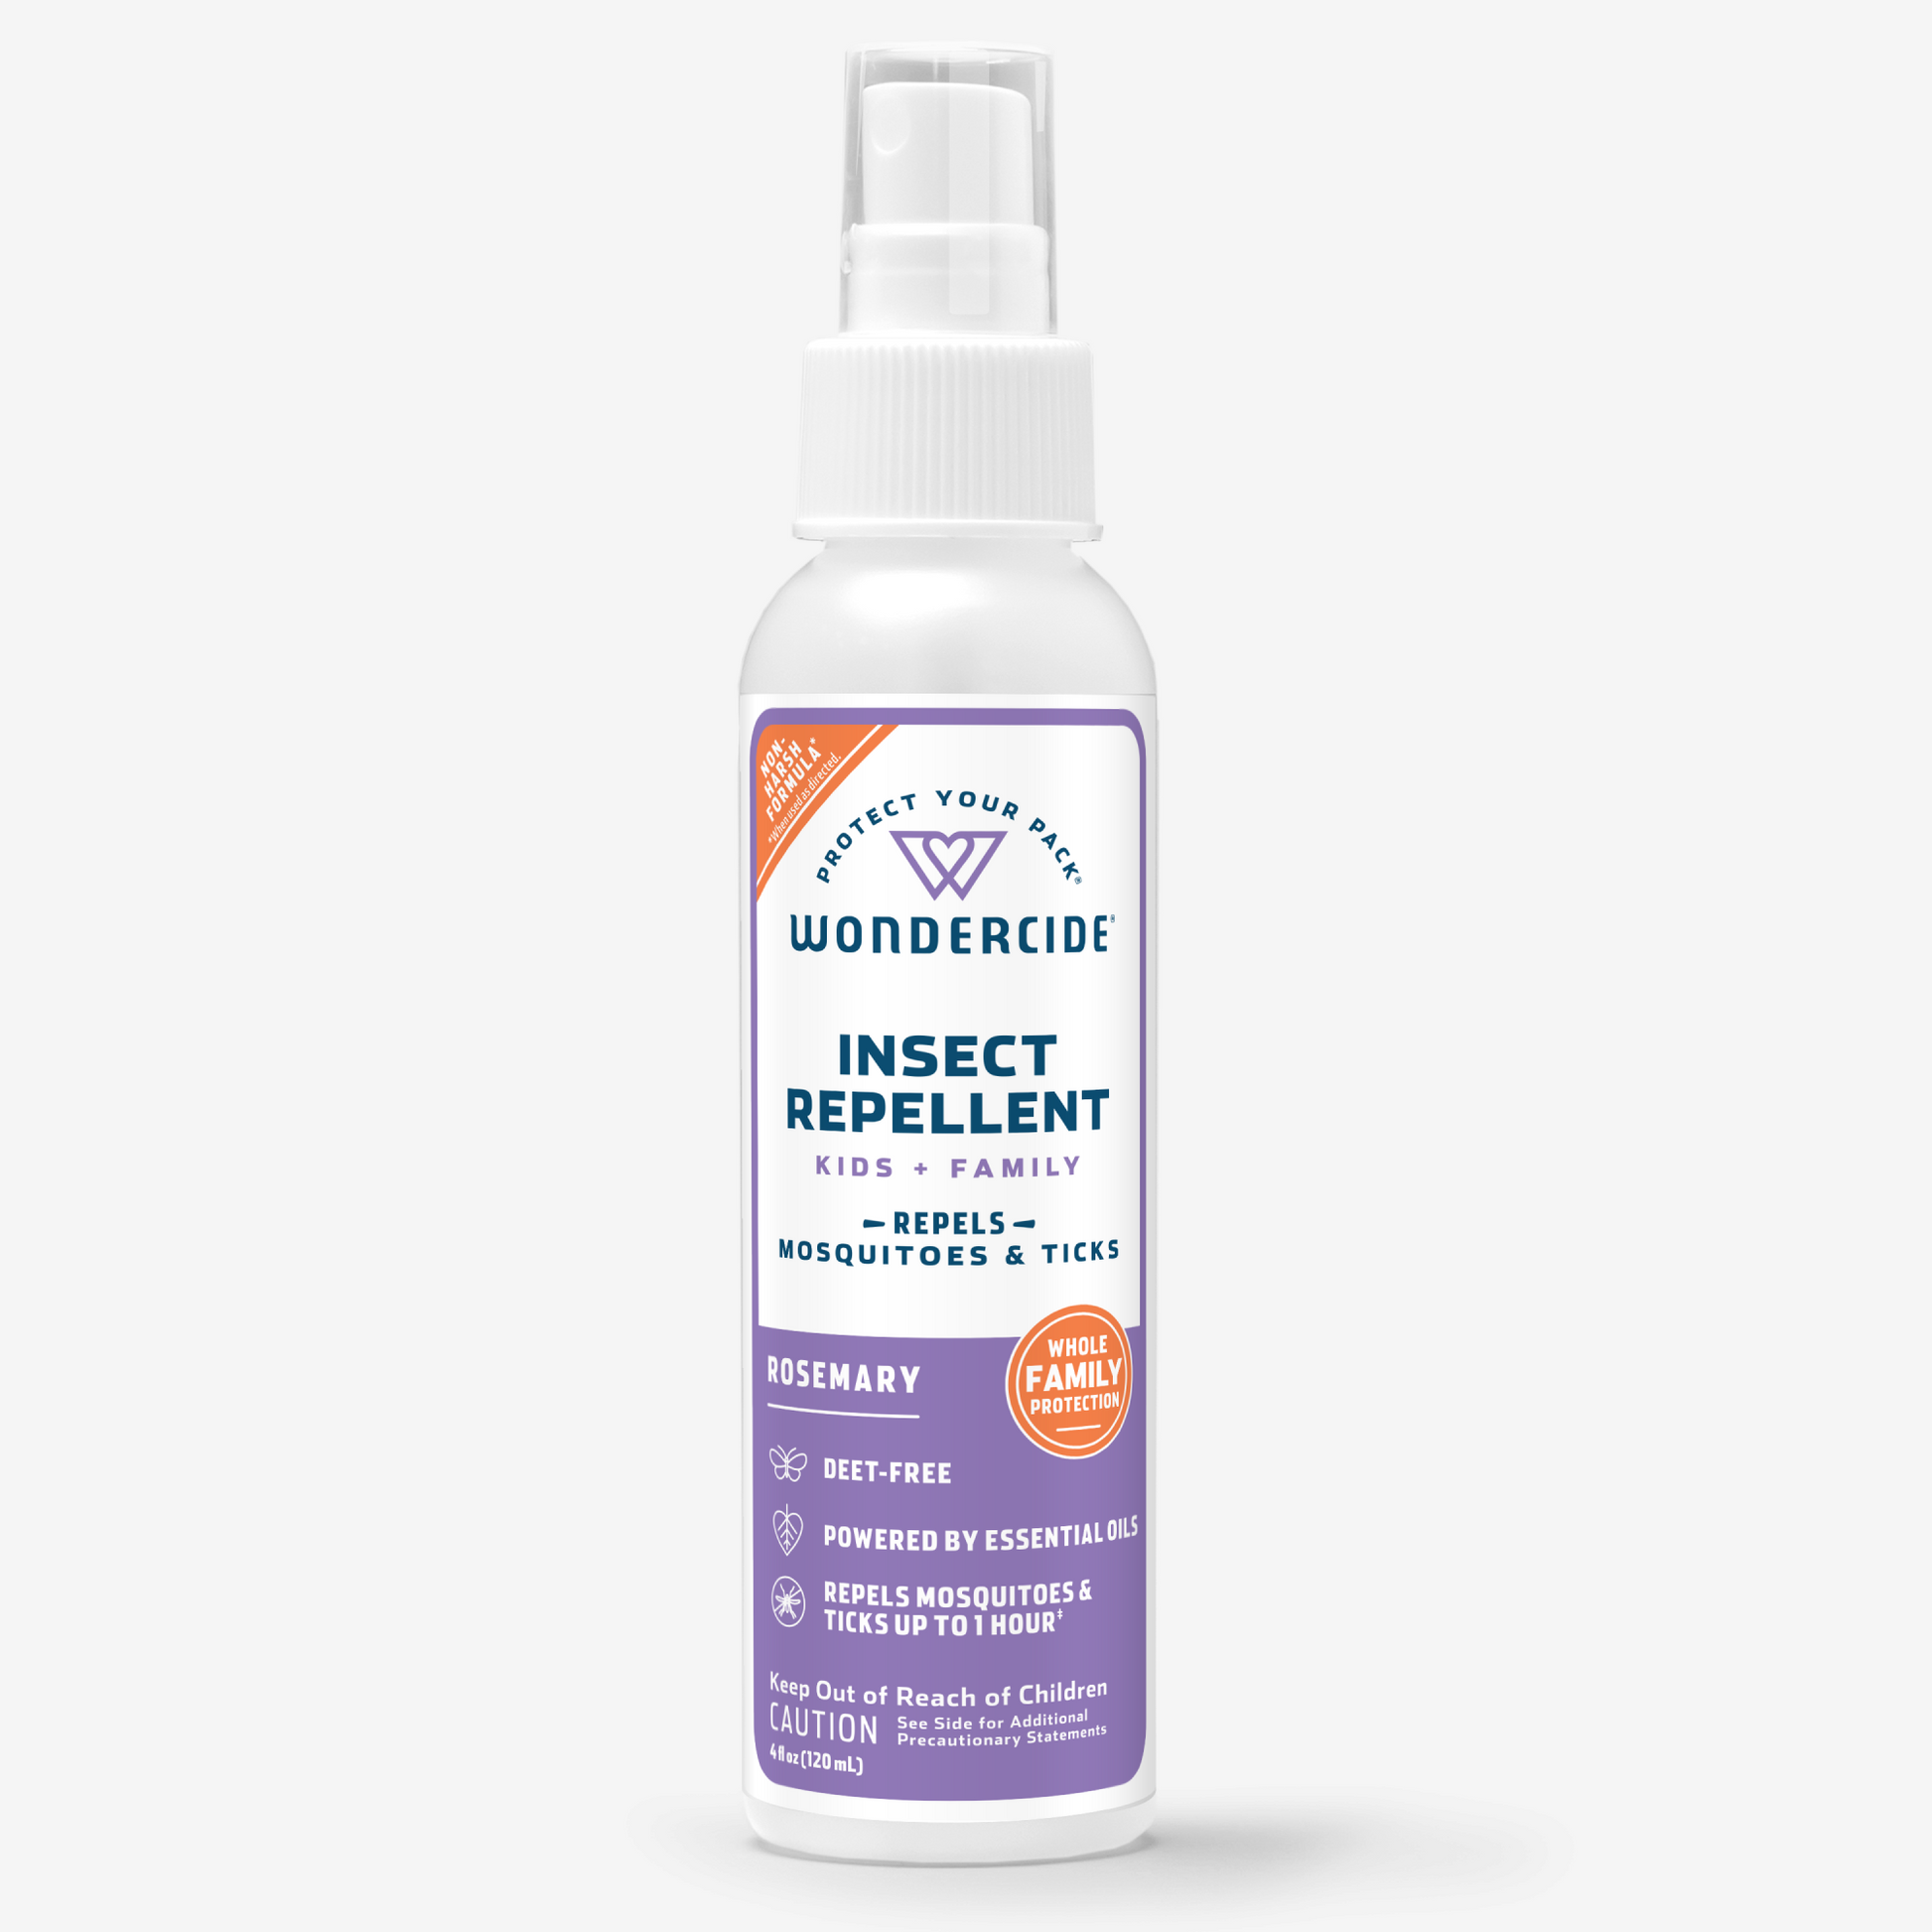 Wondercide Insect Repellent